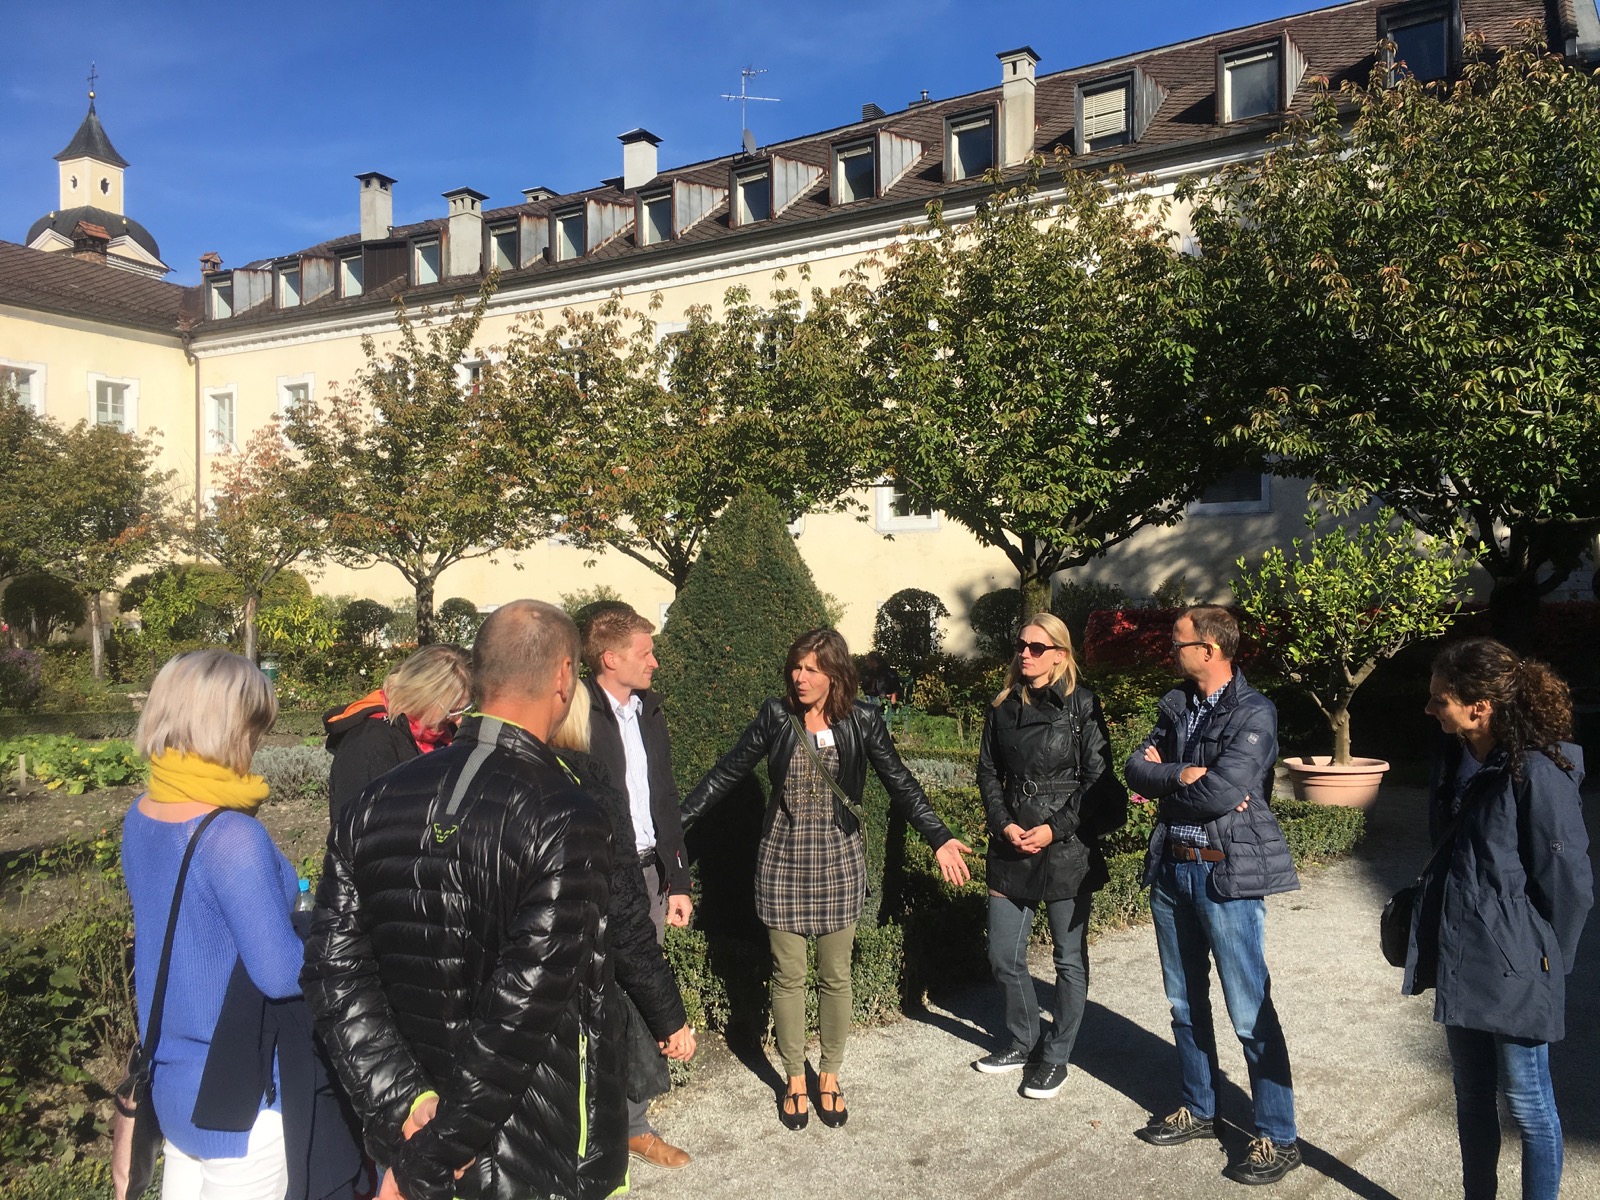 Guided tour around Brixen